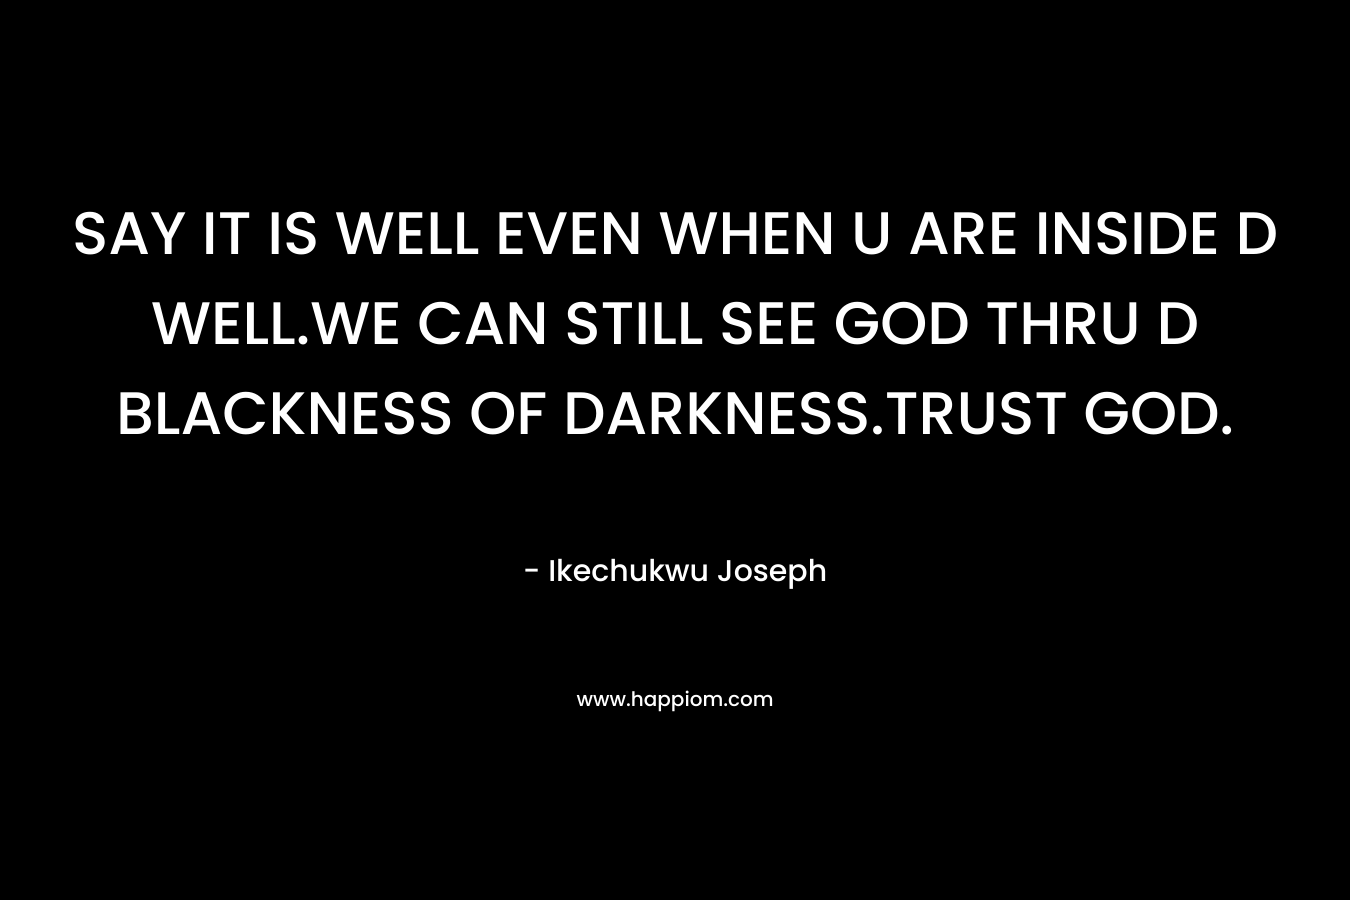 SAY IT IS WELL EVEN WHEN U ARE INSIDE D WELL.WE CAN STILL SEE GOD THRU D BLACKNESS OF DARKNESS.TRUST GOD. – Ikechukwu Joseph